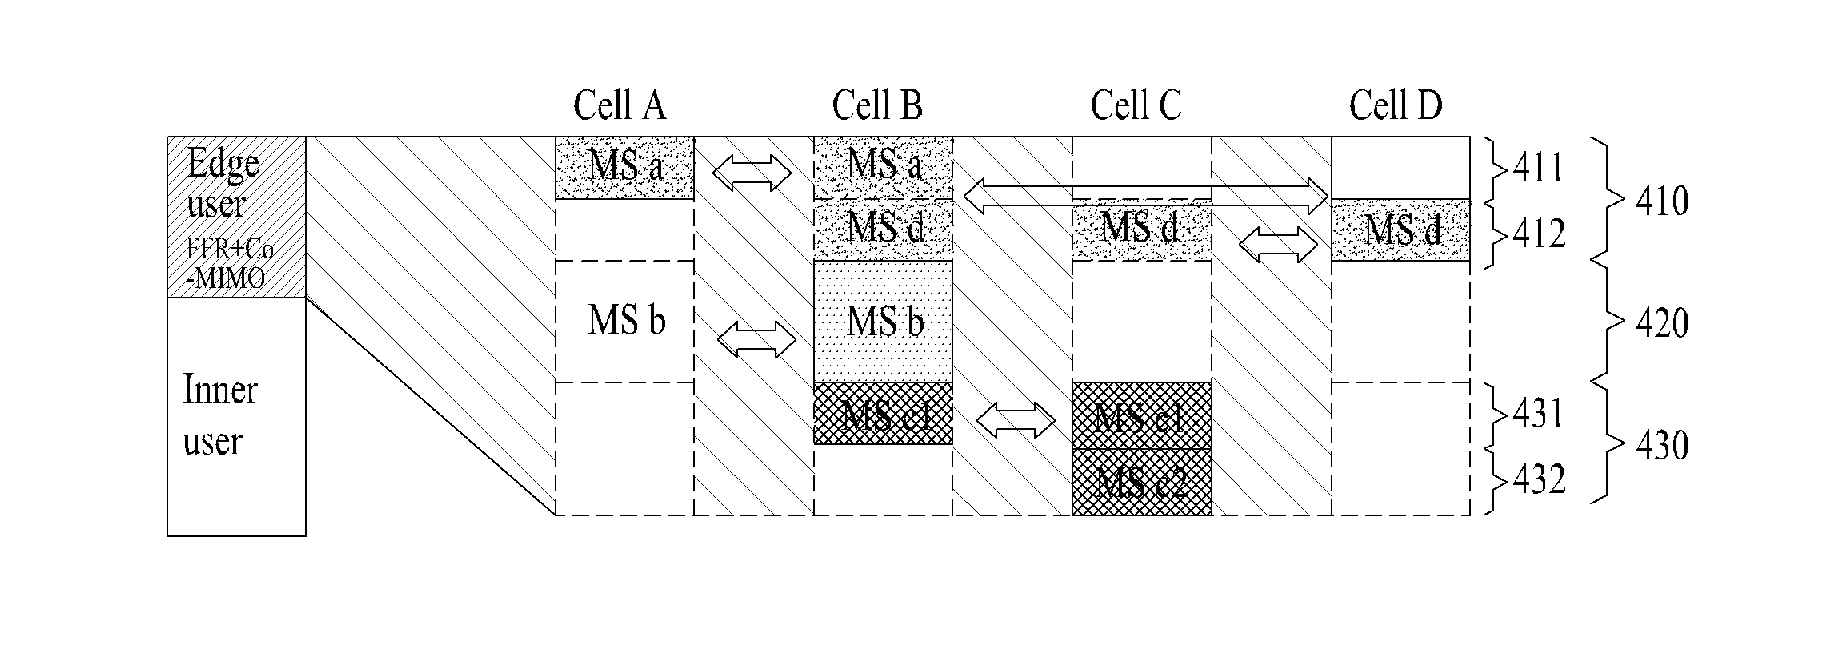 Method for allocating resources for edge-users using cooperative MIMO